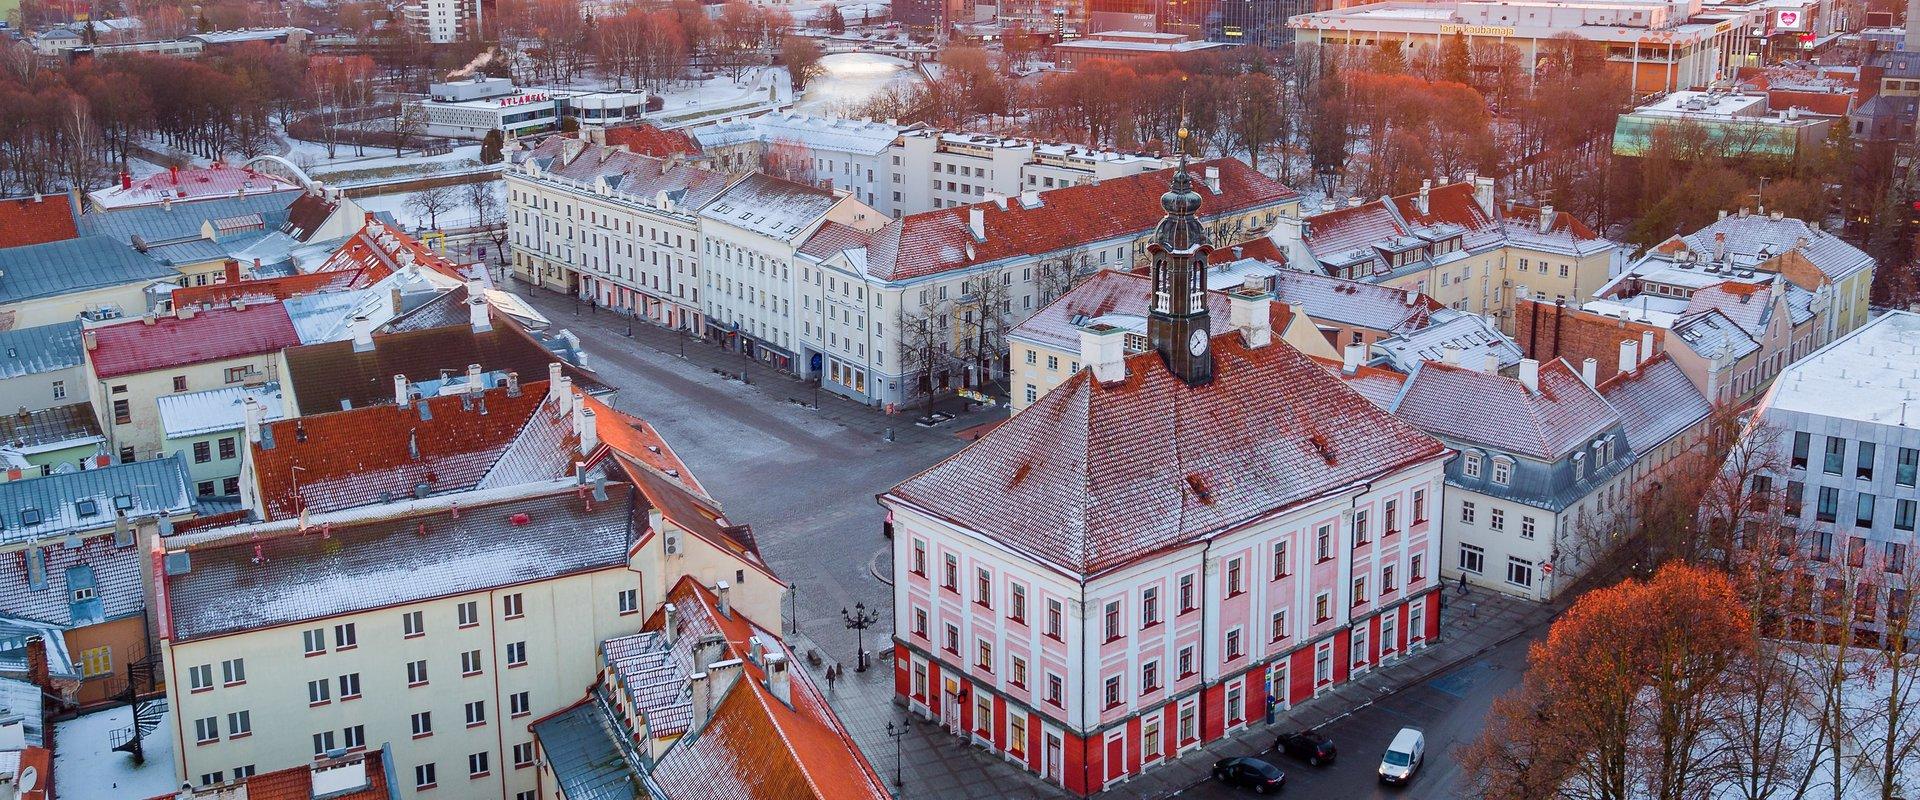 Town Hall Square in Tartu